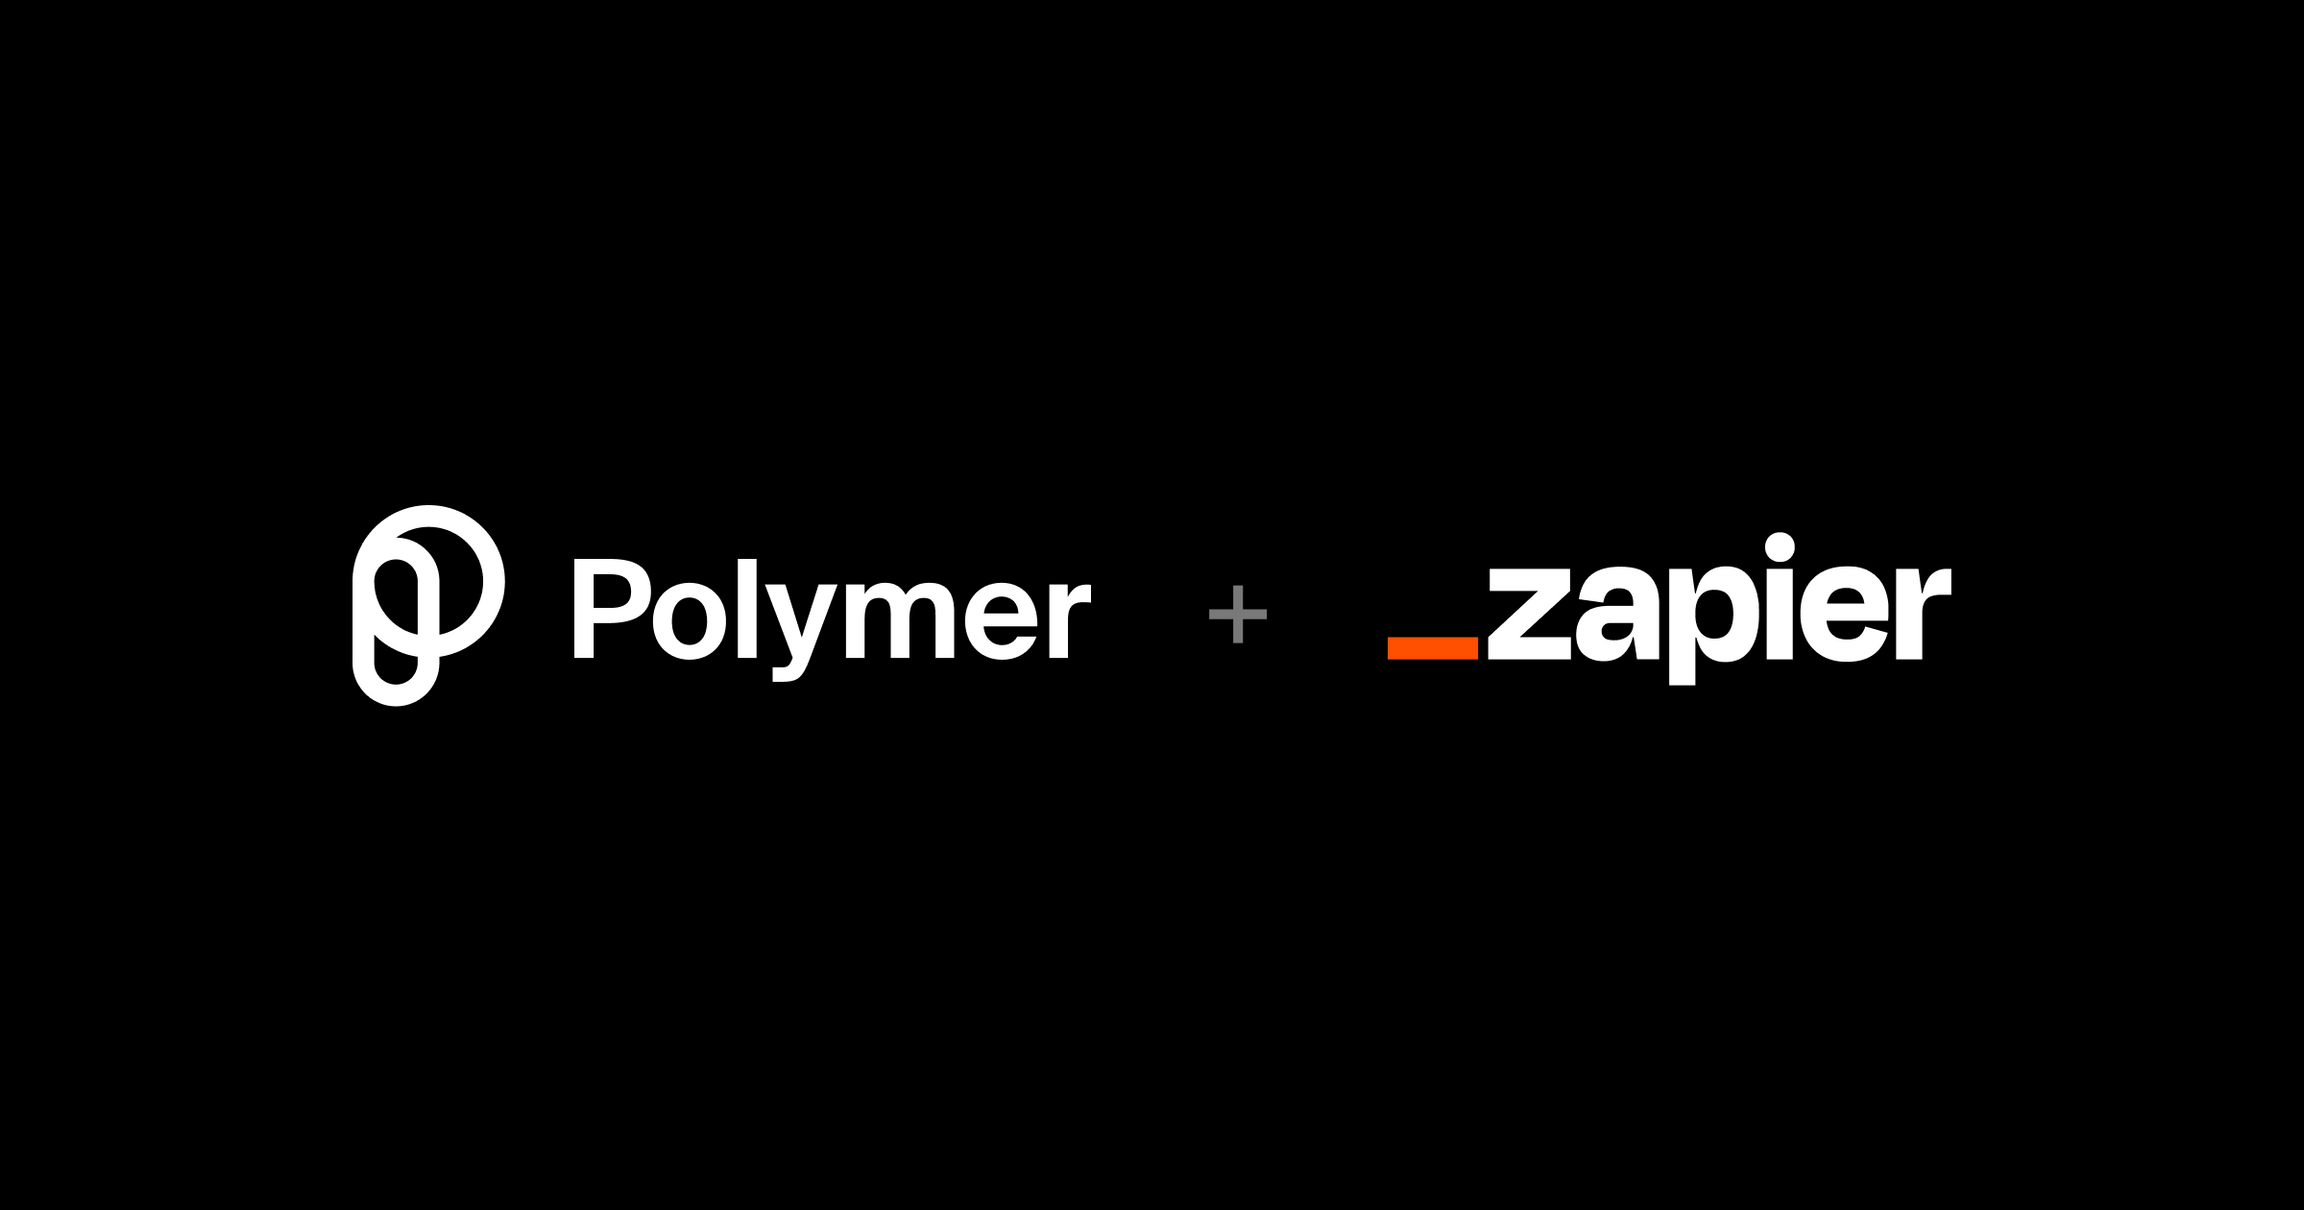 The Polymer and Zapier logos displayed in white on a black background with a gray plus sign in between them.